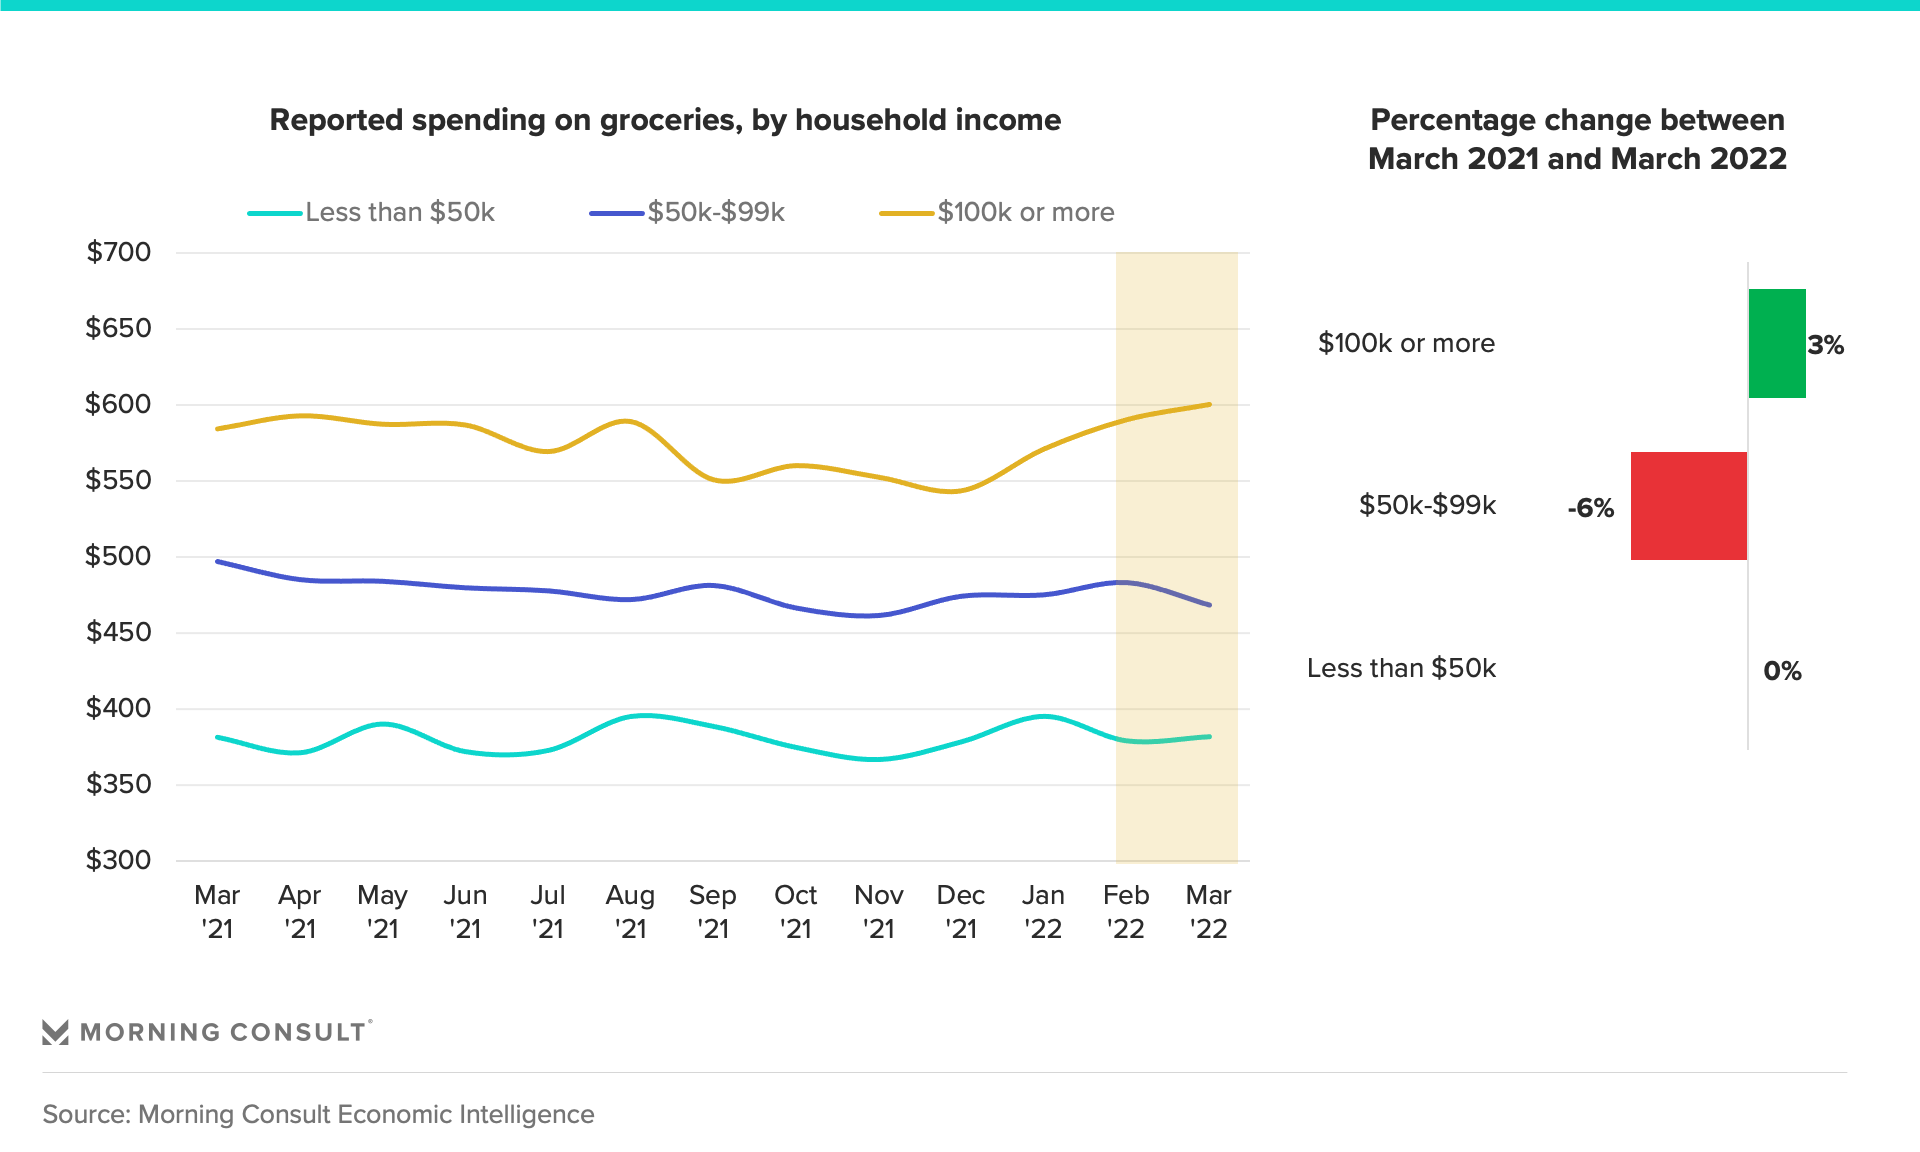 Line and bar graphs showing U.S. consumer spending on groceries 2021-2022 by household income